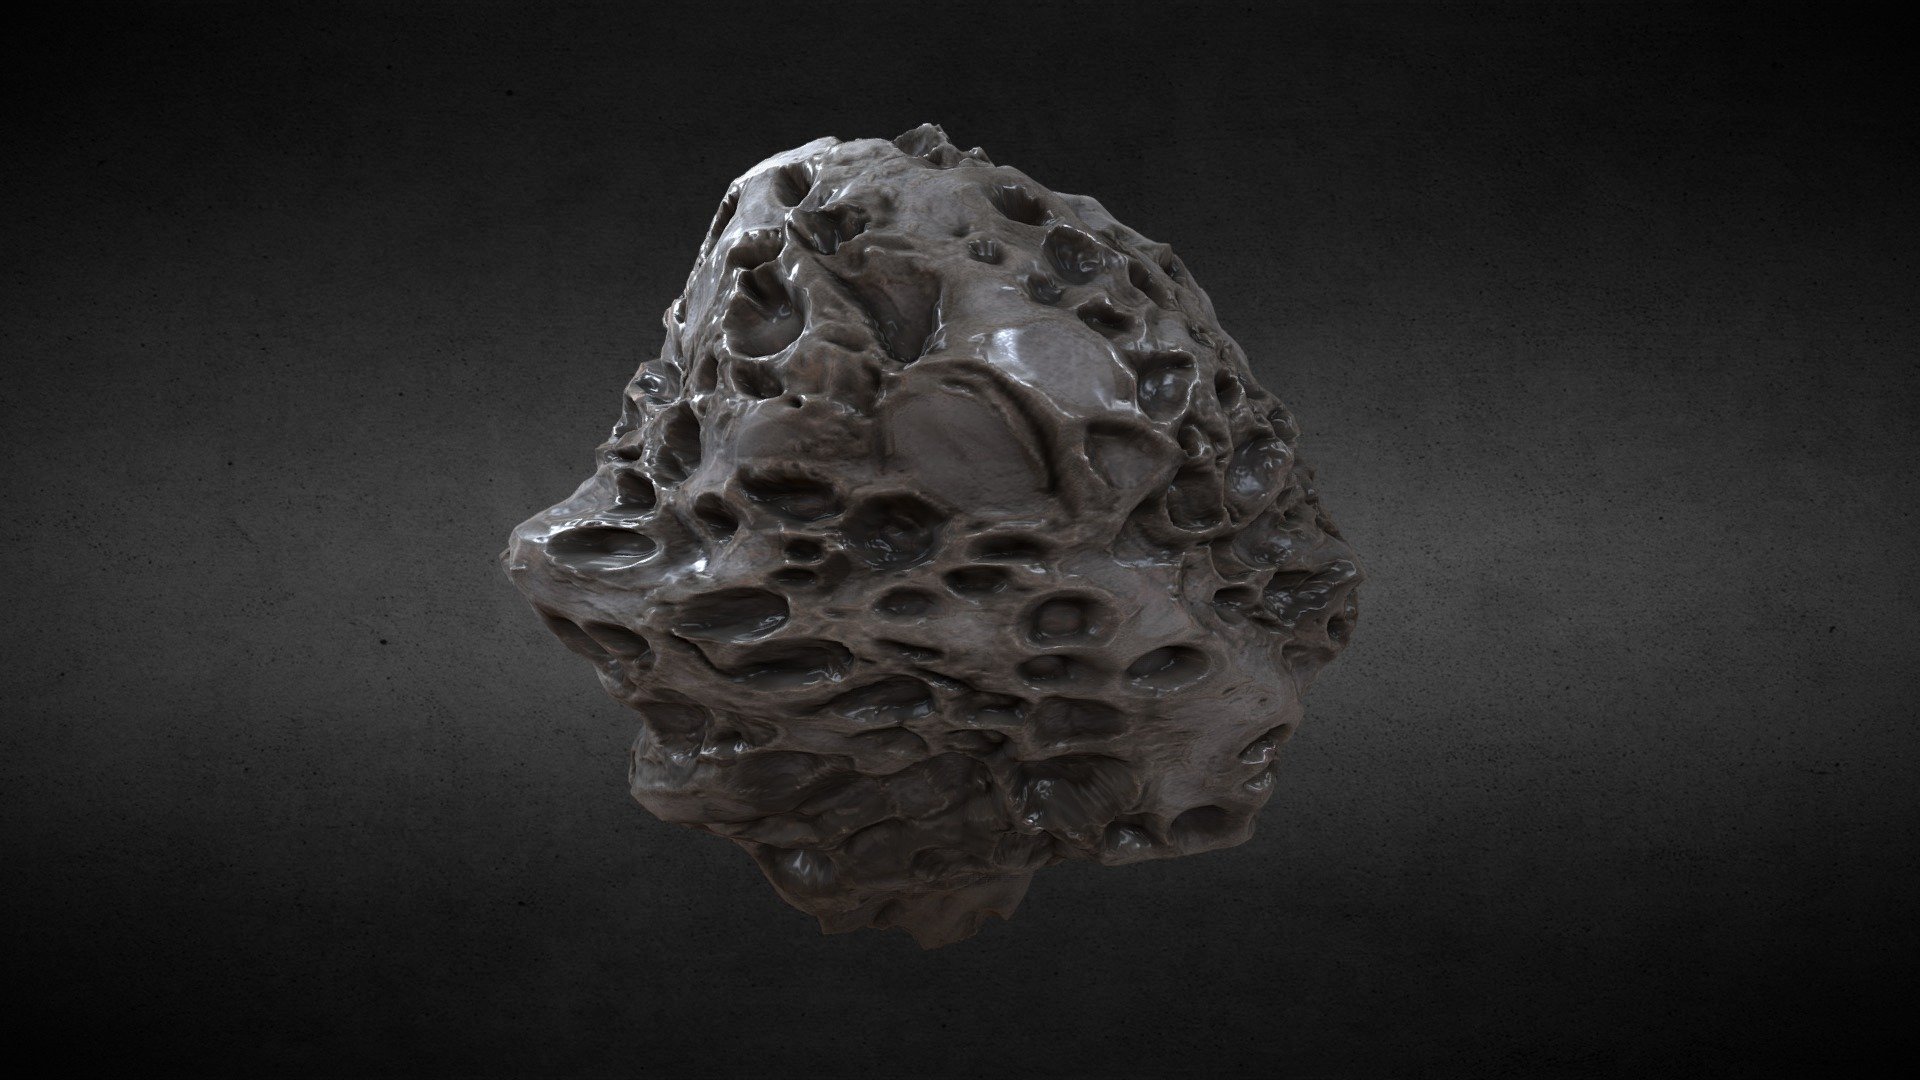 Ideal for a simulated asteroid field, this spacerock looks creepy and immersive with its cratered surface! It definitely provides the right vibes for a sci-fi themed game or a good 3D render for a poster!

Showcase Mesh: MatSphere v1p4x (My custom &ldquo;Low-pinch